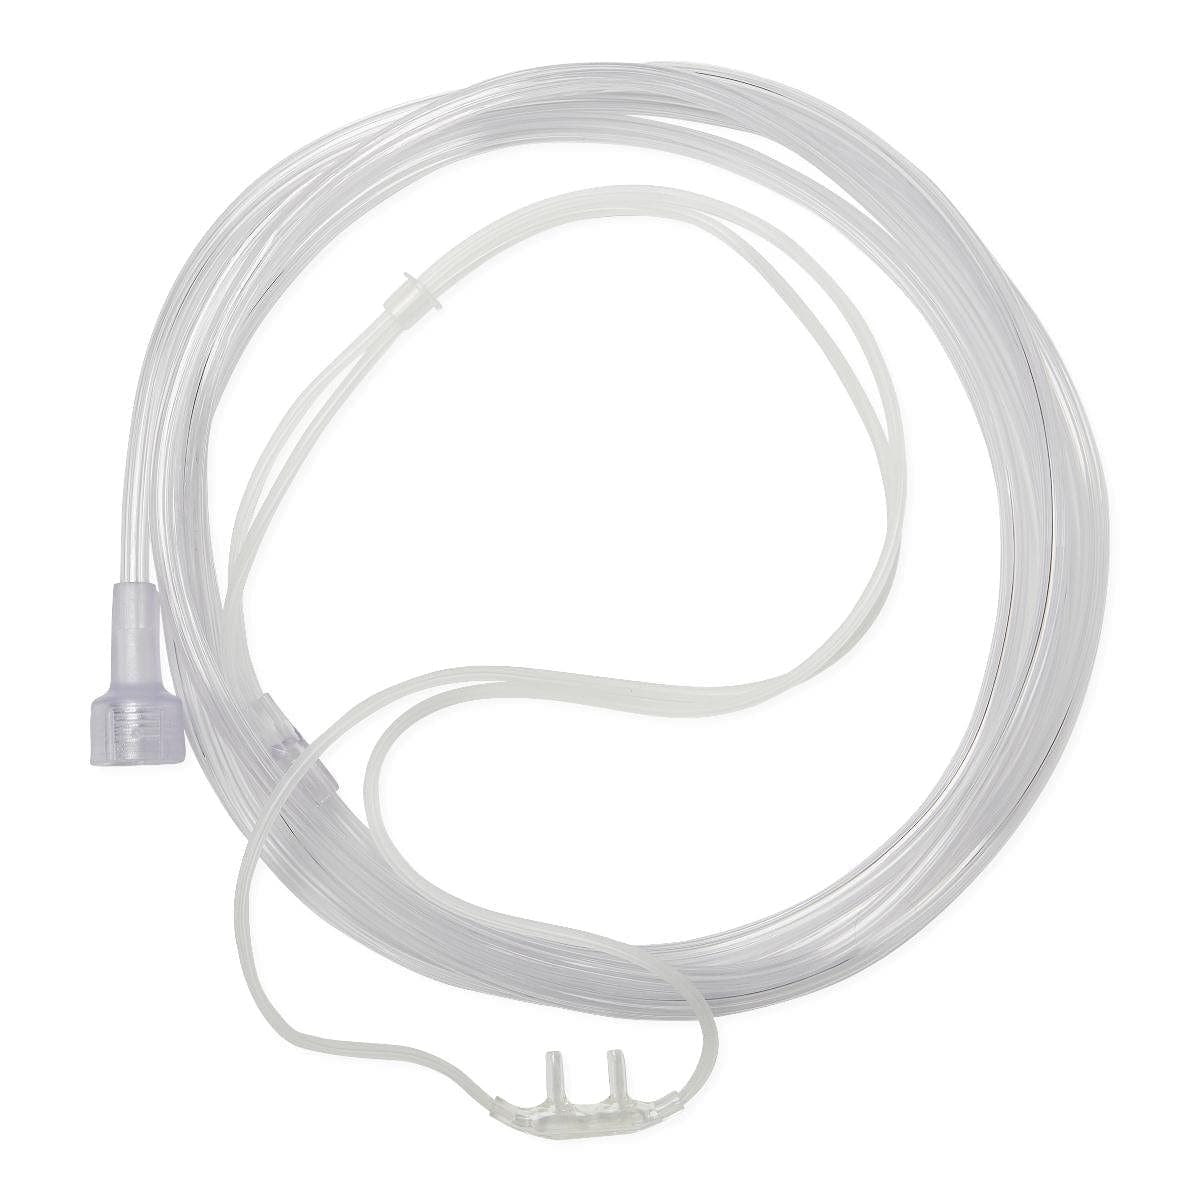 Medline Case of 50 / 7.00 FT / Pediatric Medline SuperSoft Oxygen Cannulas with Universal Connector